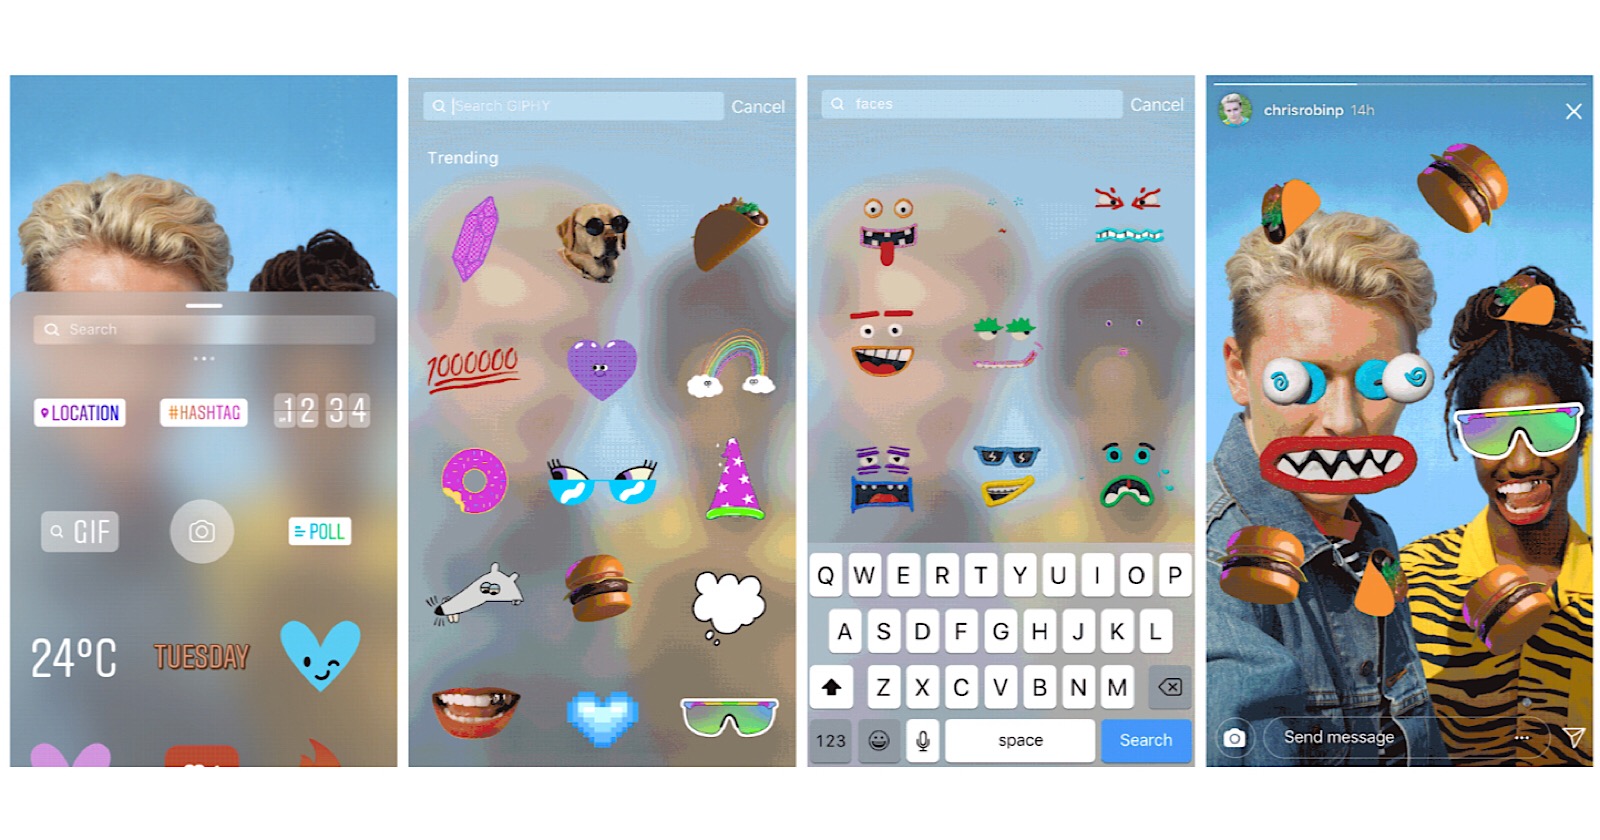 How to Use GIF Stickers in Instagram Stories